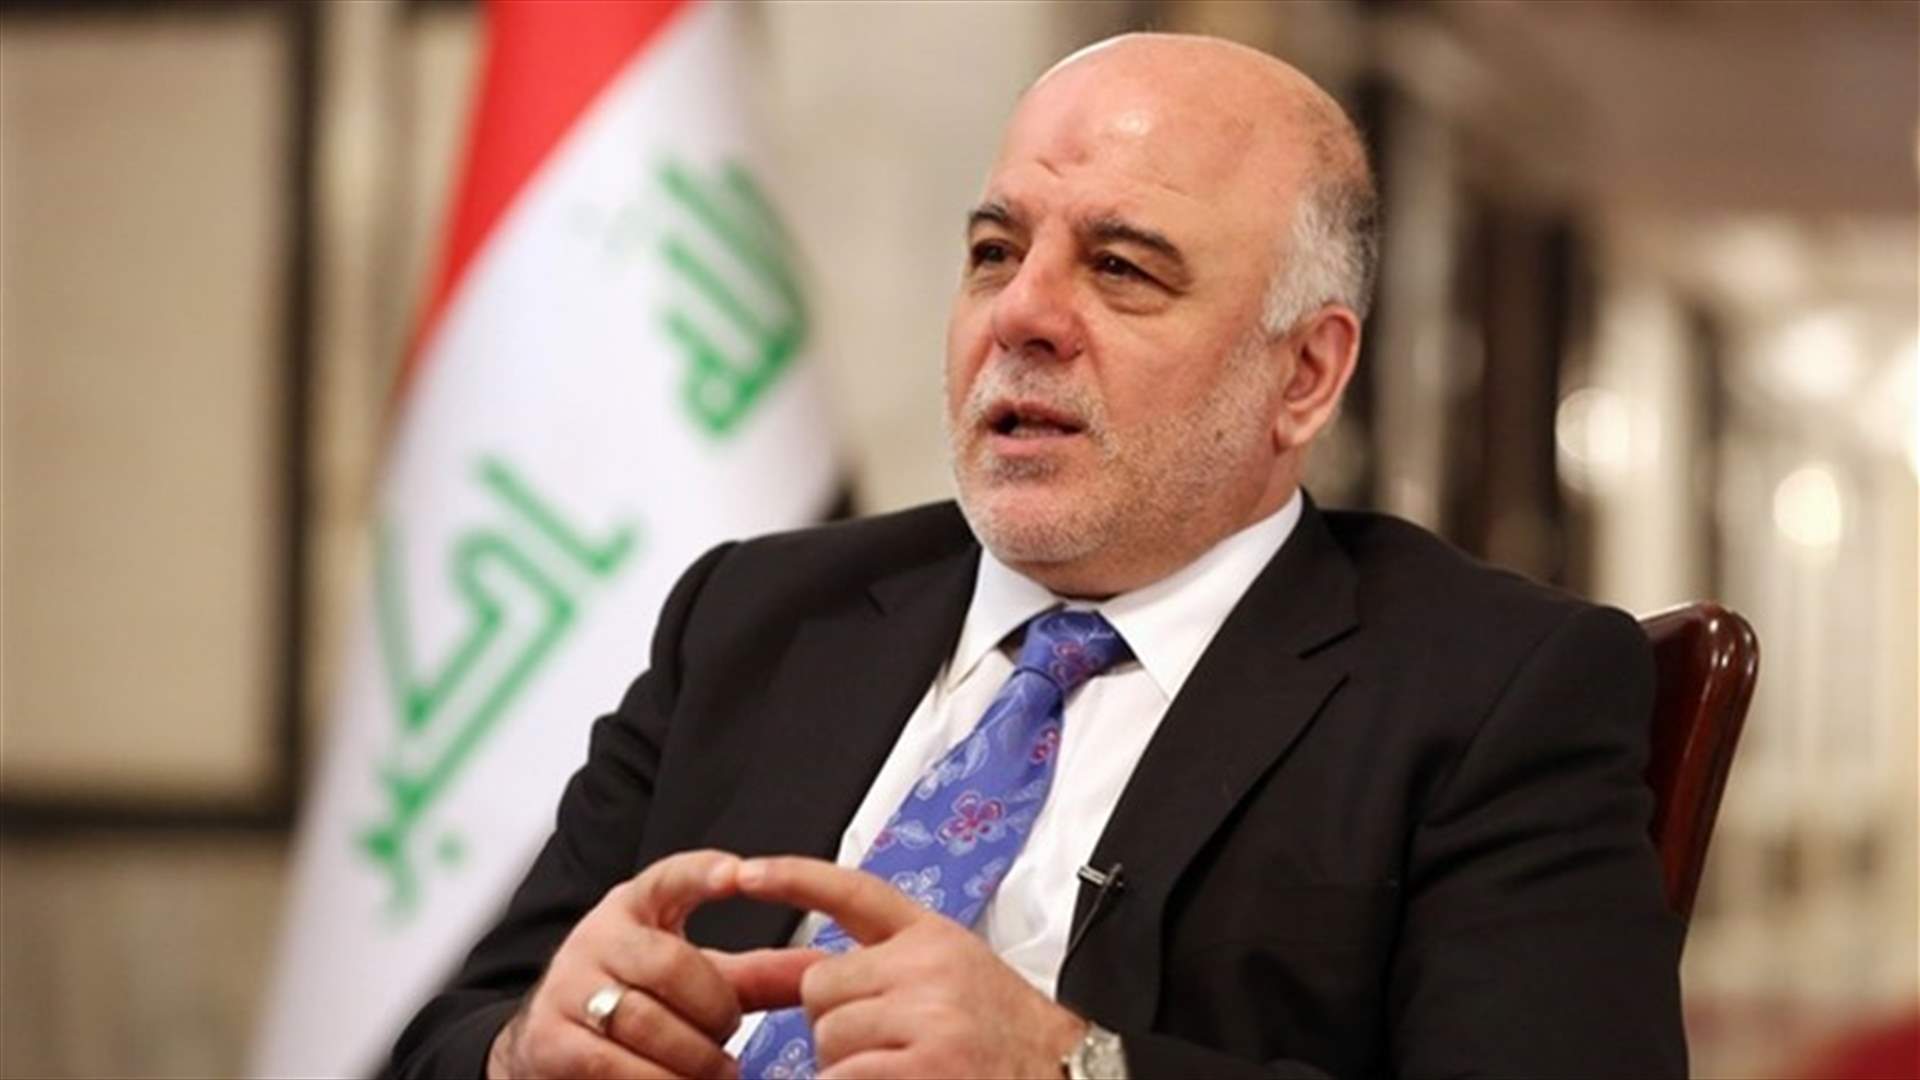 Iraqi PM to present new cabinet lineup to parliament on Thursday